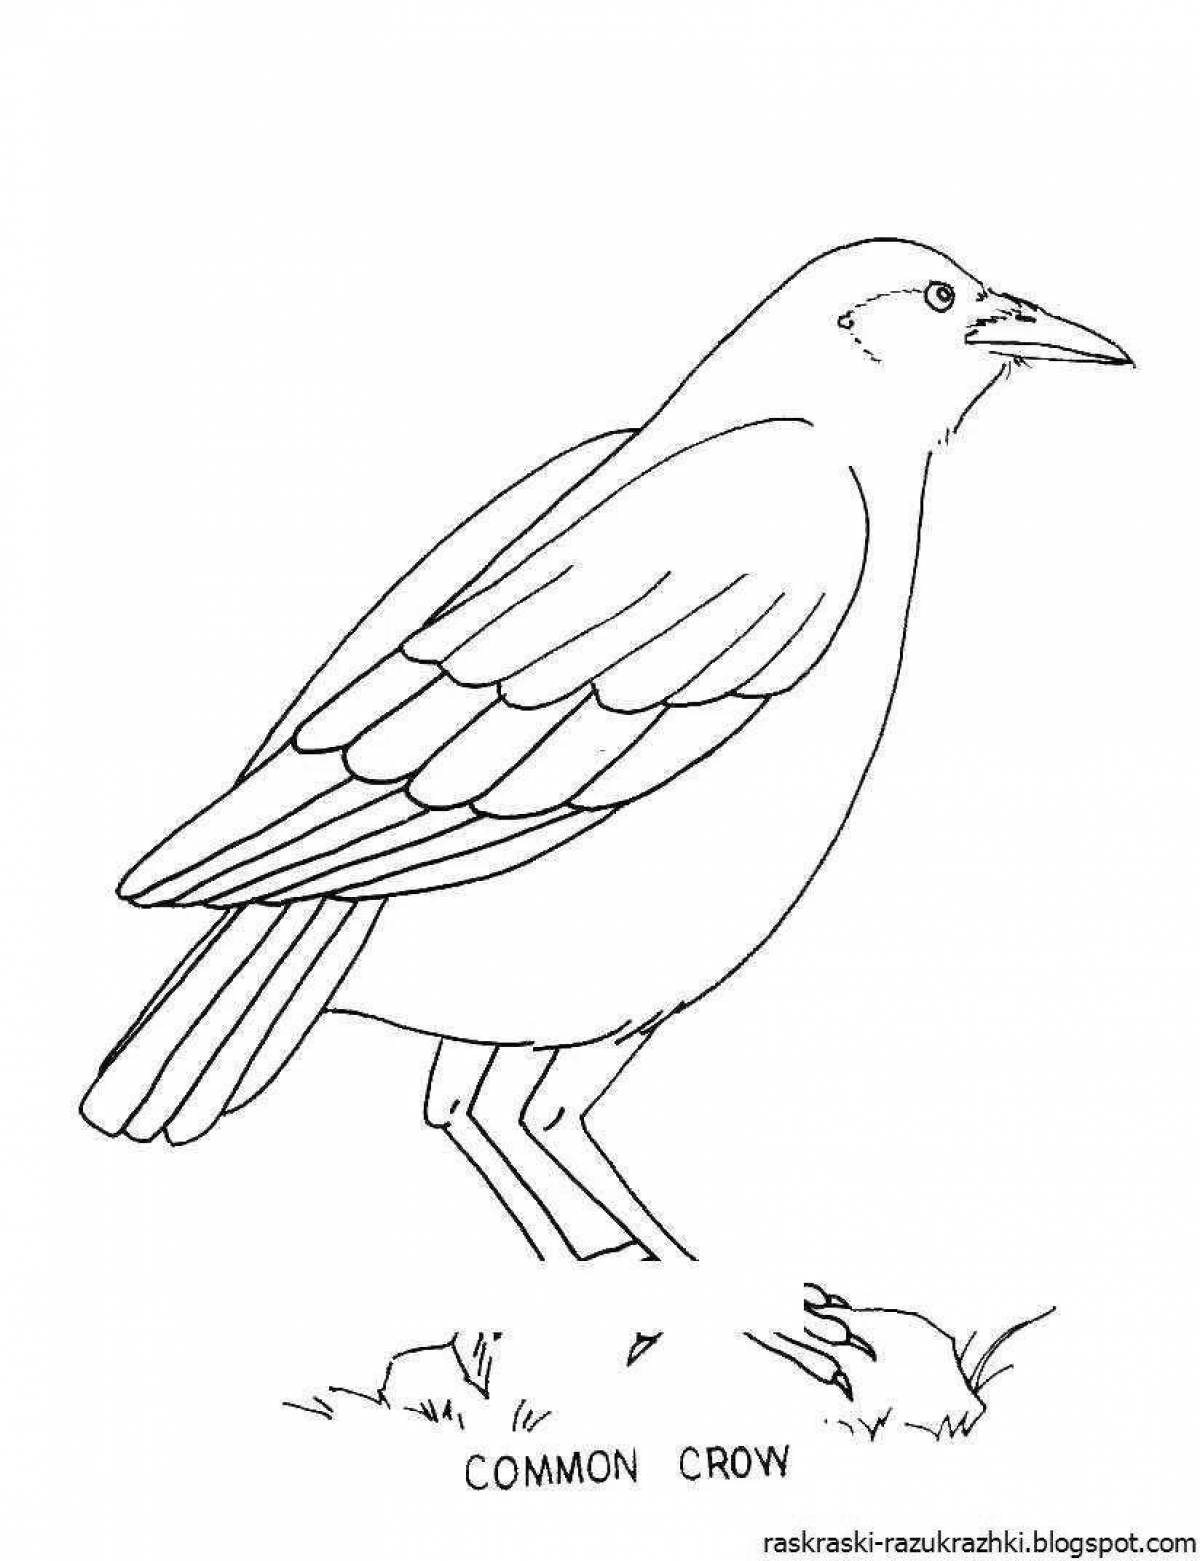 Great drawing of a crow